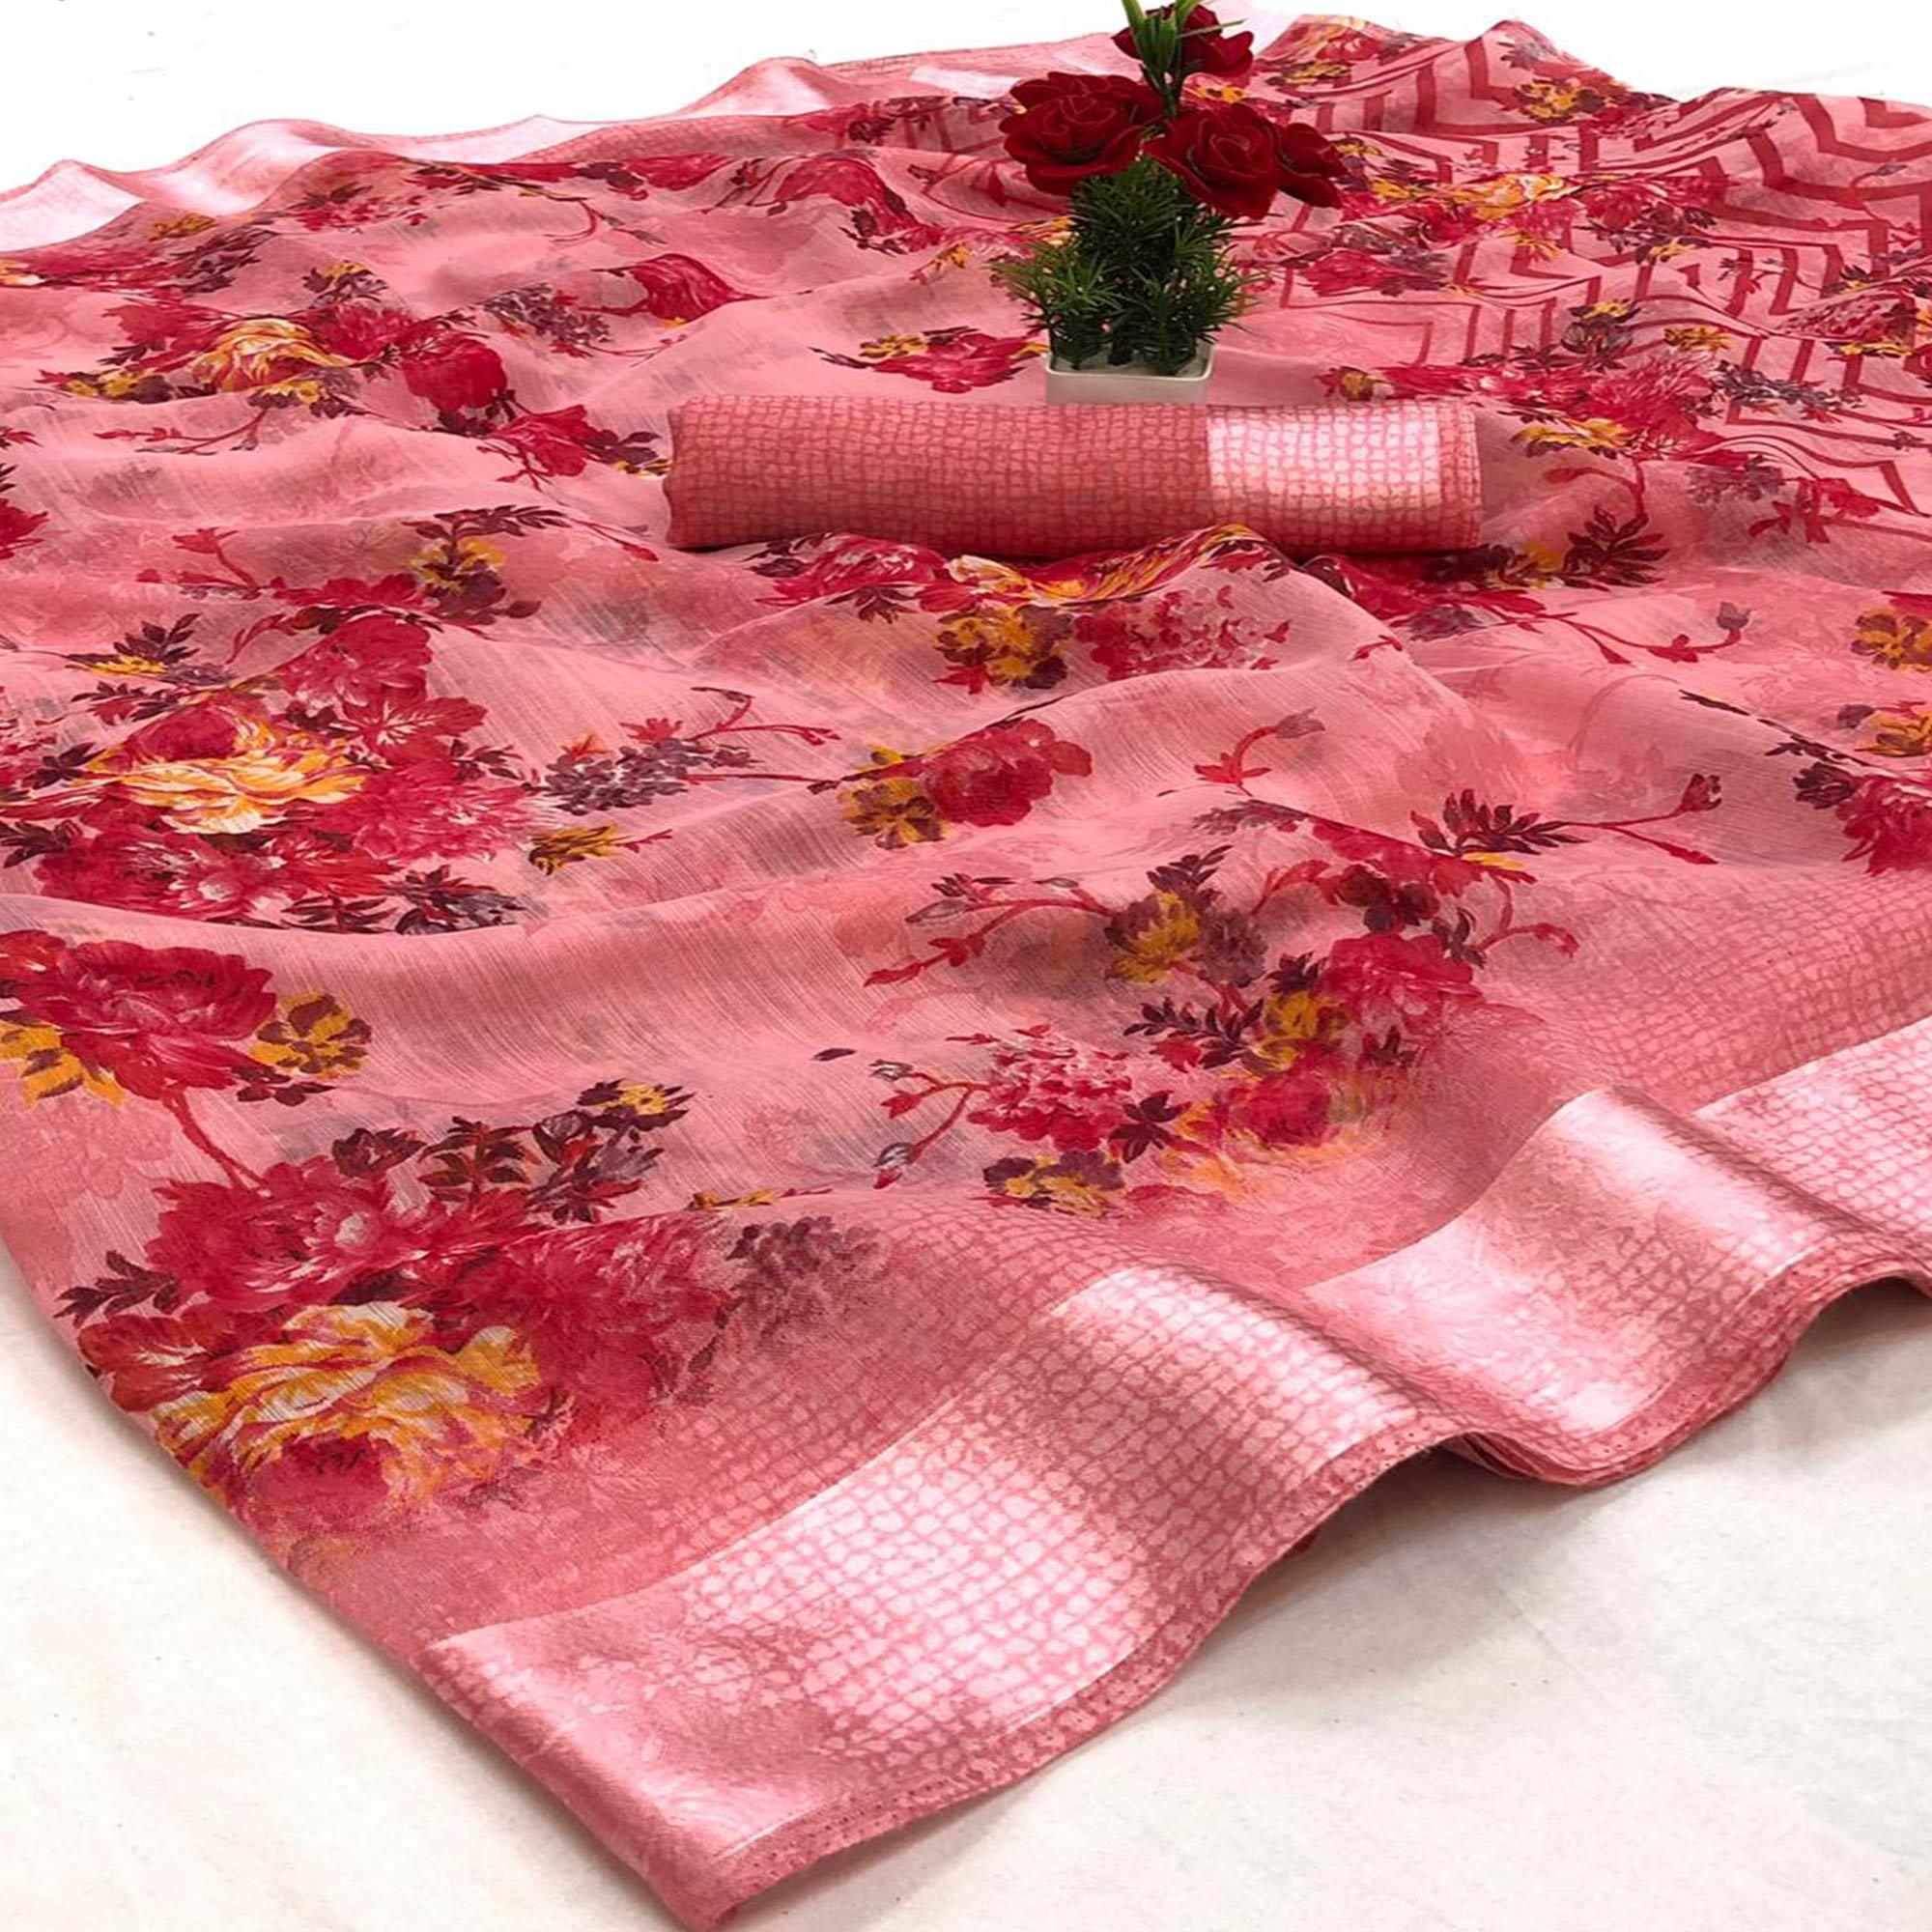 Desirable Pink Colored Casual Wear Digital Printed Heavy Cotton Linen Saree - Peachmode